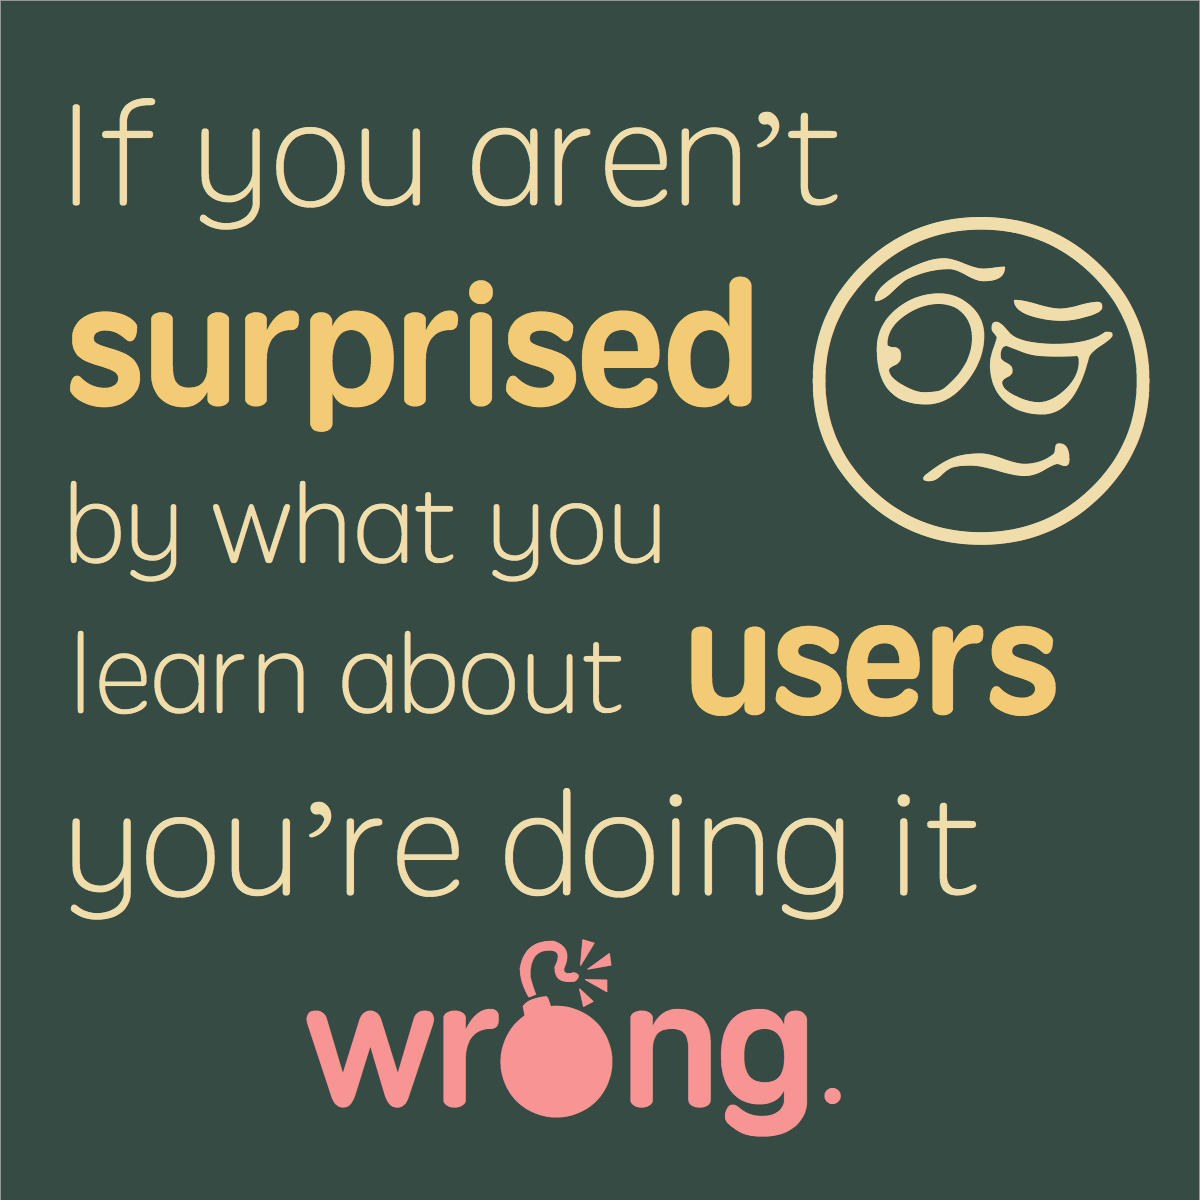 If you aren't surprised by what you learn about users you're doing it wrong.